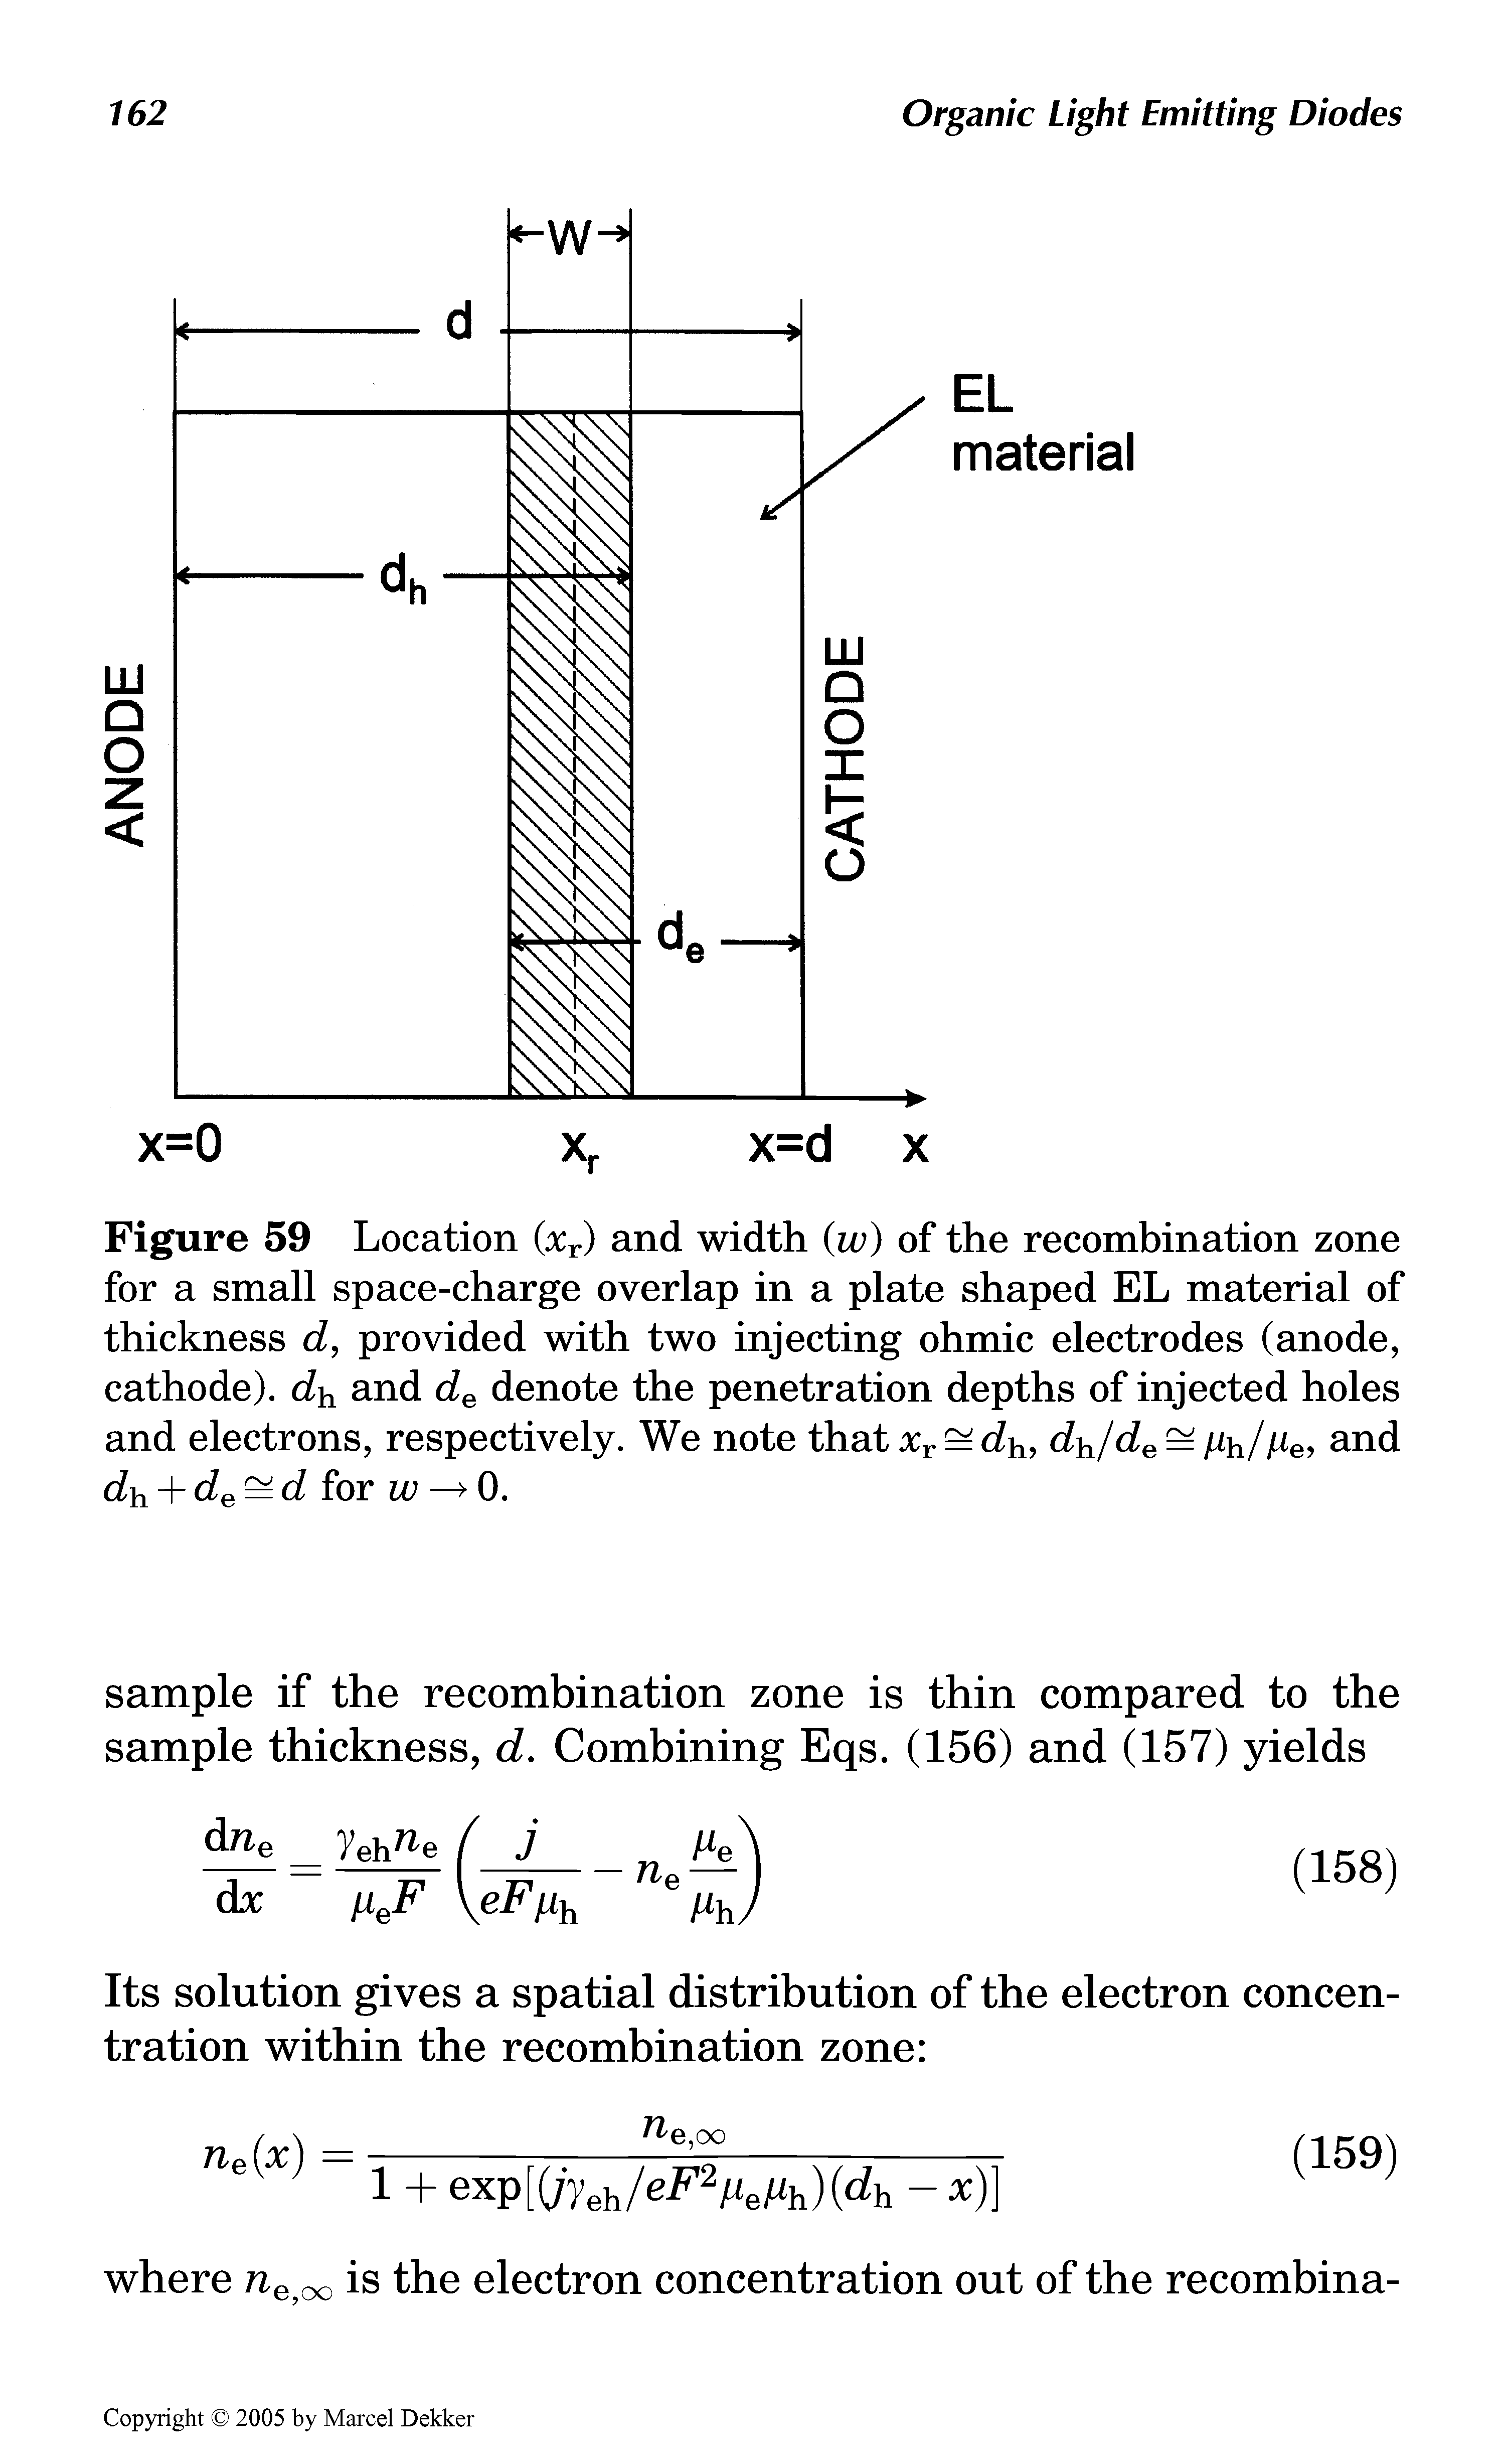 Figure 59 Location (xT) and width (w) of the recombination zone for a small space-charge overlap in a plate shaped EL material of thickness d, provided with two injecting ohmic electrodes (anode, cathode), dh and de denote the penetration depths of injected holes and electrons, respectively. We note that xr = dh, d /de = /ih/and dh de = d for w —> 0.